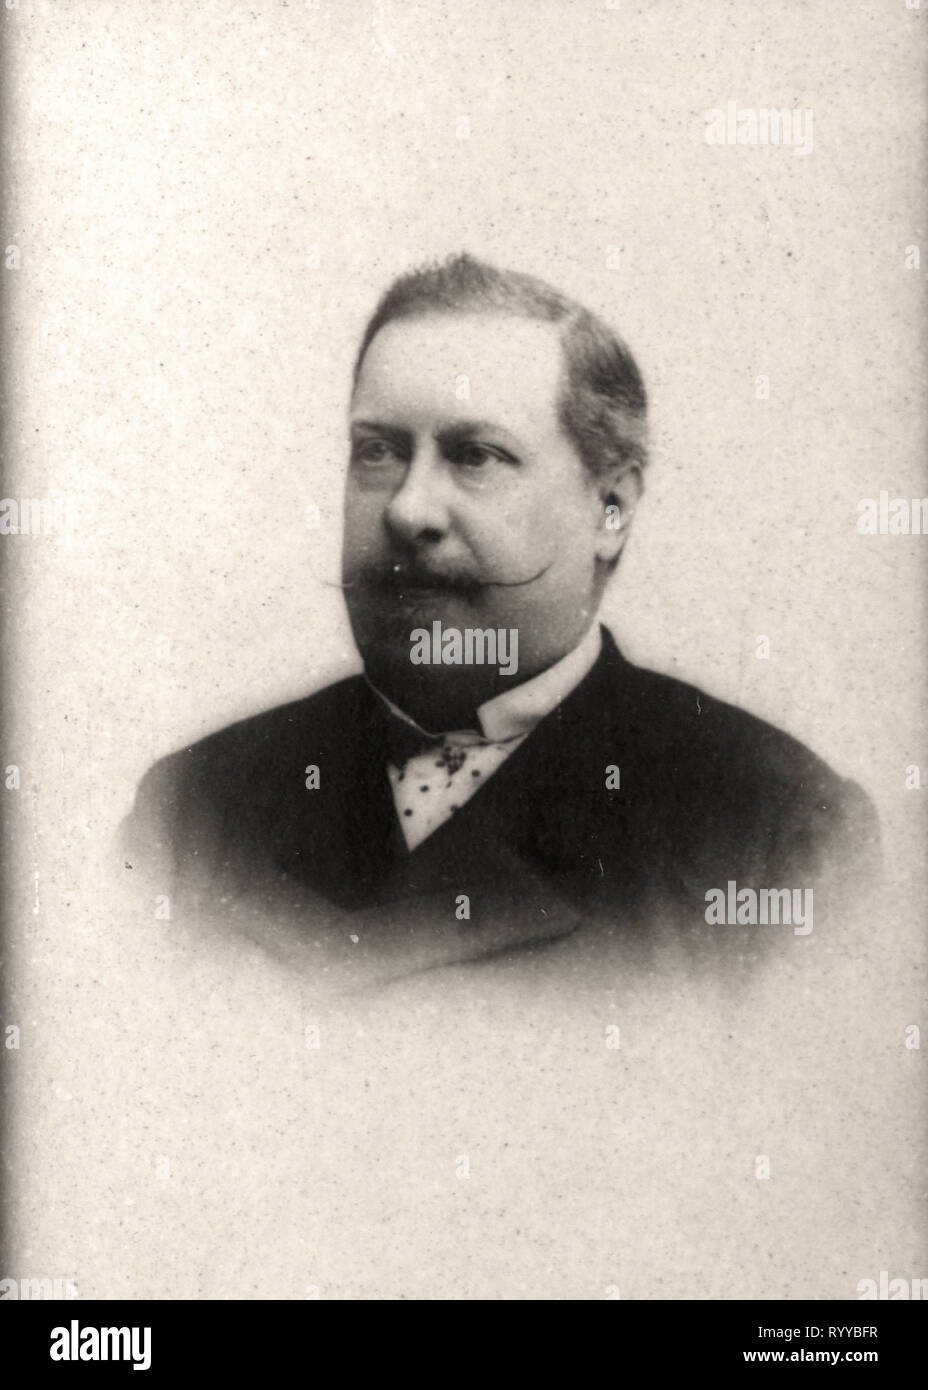 Photographic Portrait Of Louis Ier Roi De Portugal   From Collection Félix Potin, Early 20th Century Stock Photo